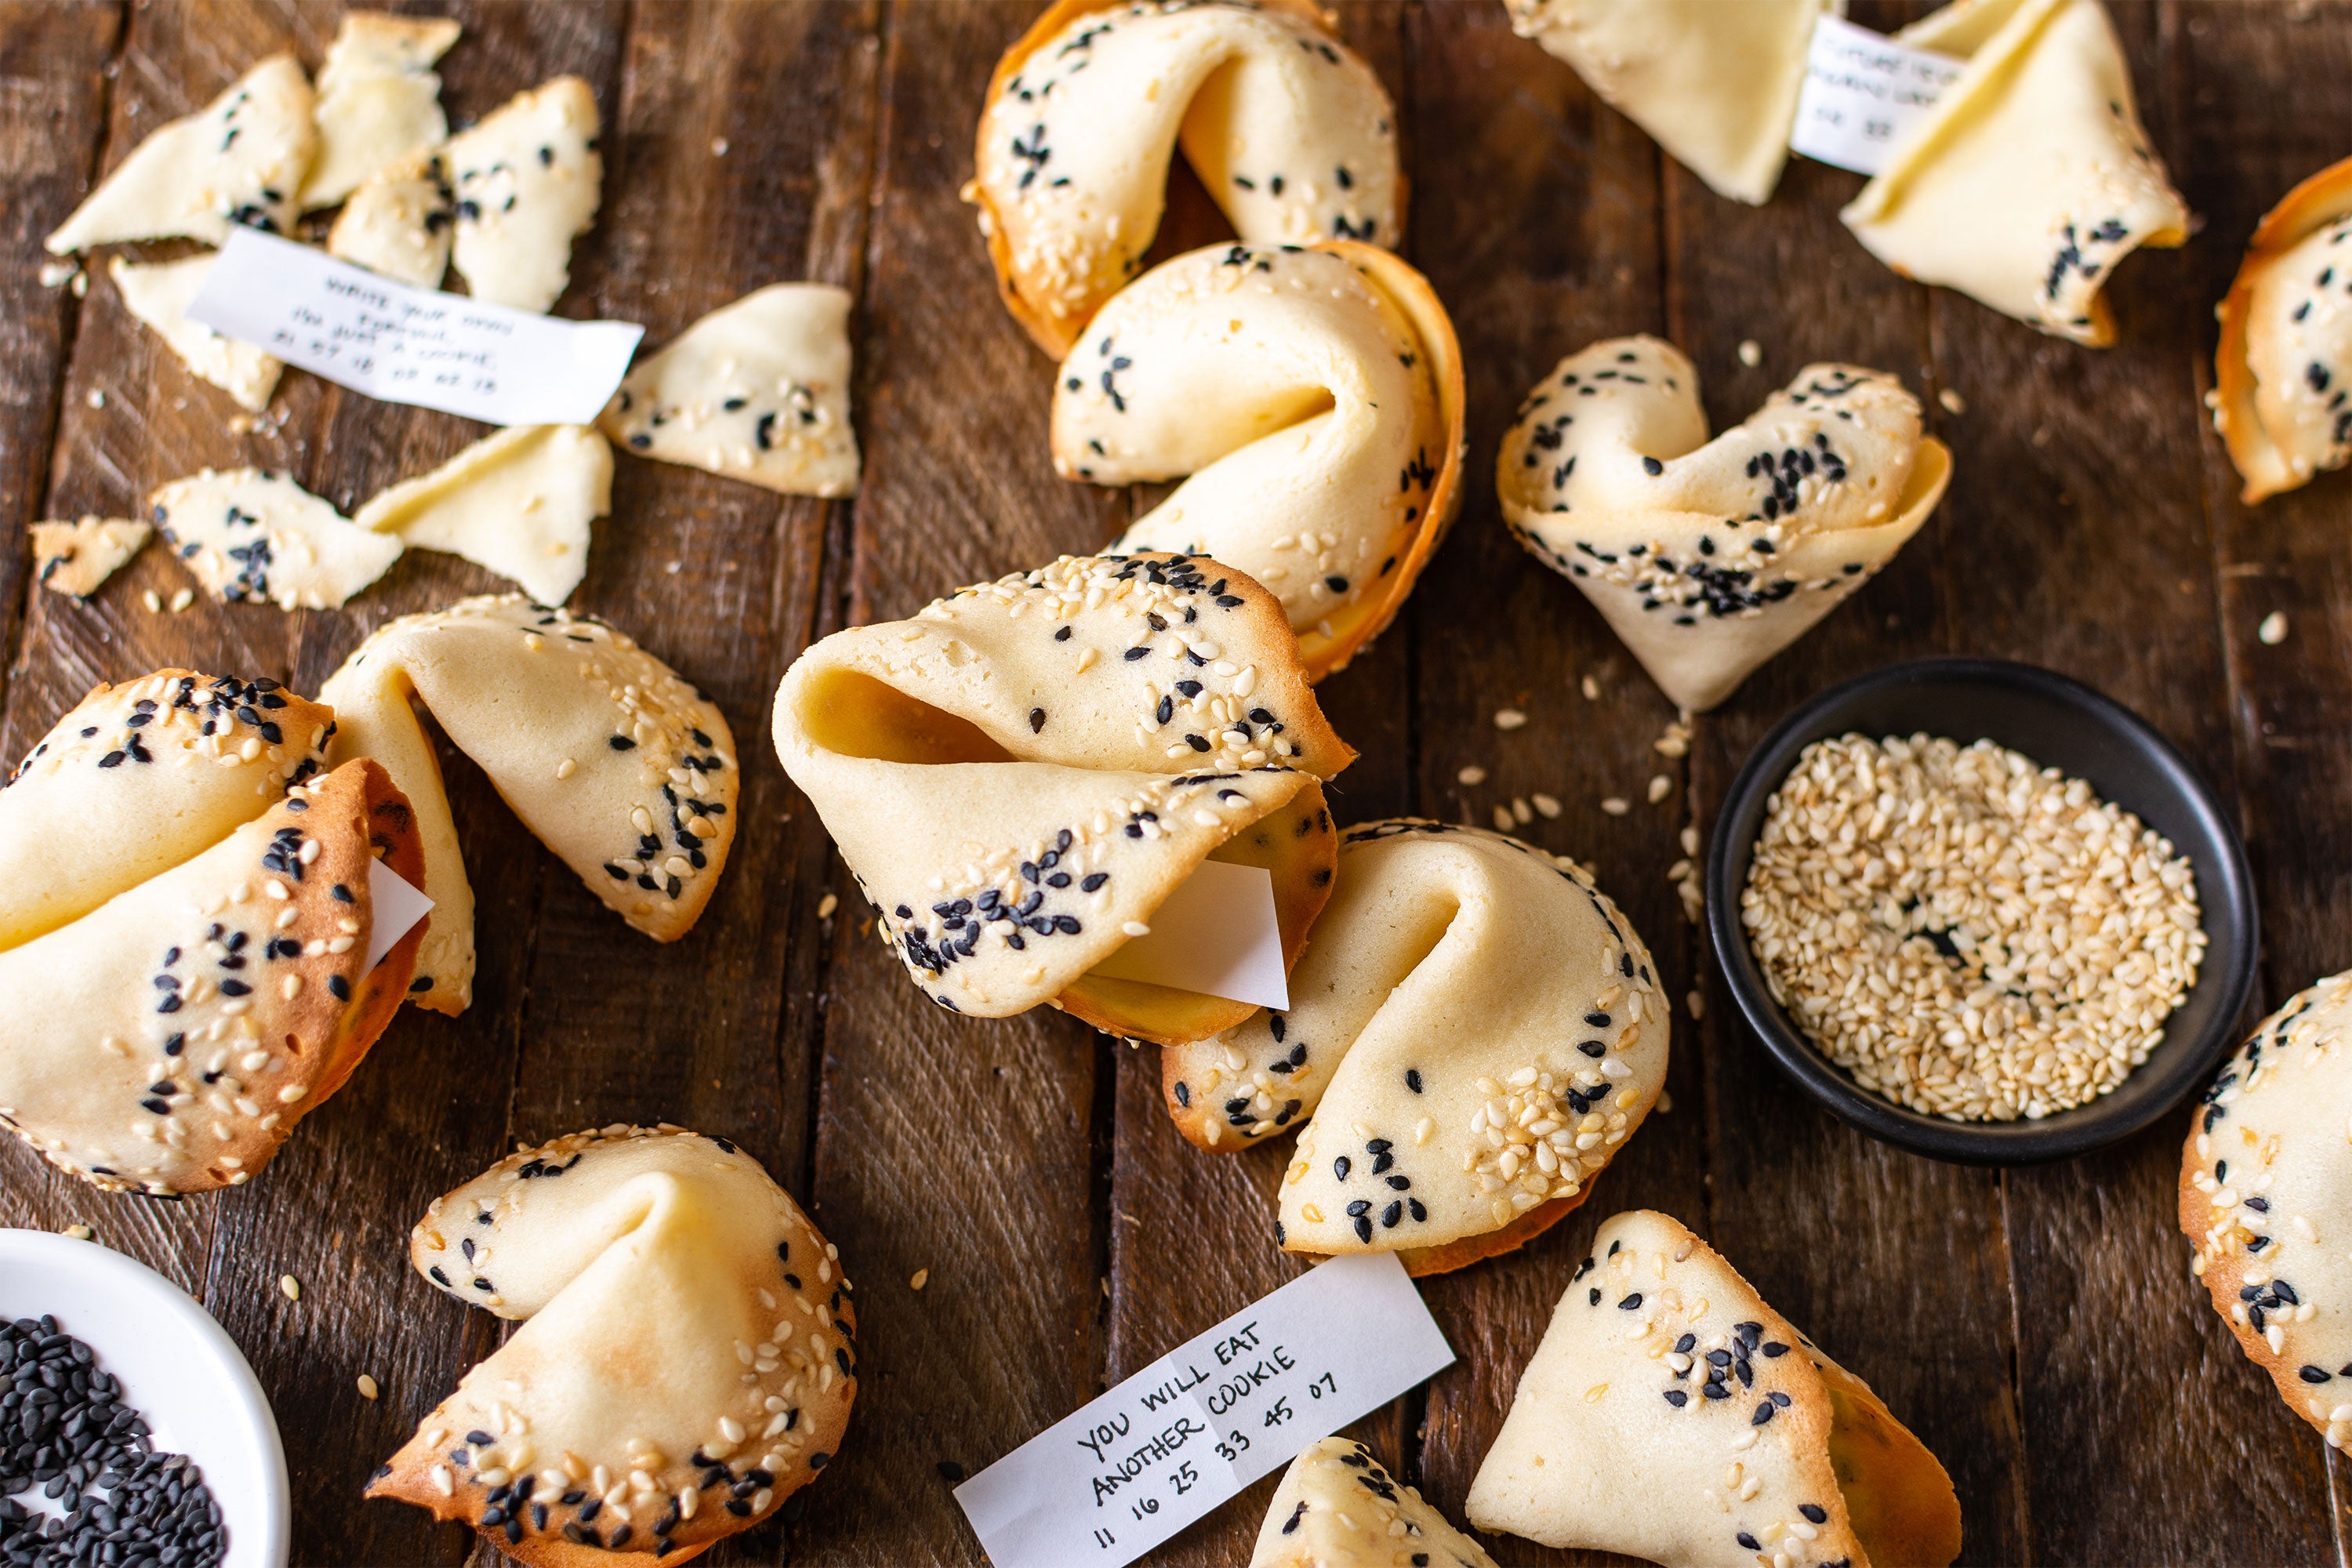 Honey Sesame Fortune Cookies with black and white sesame seeds